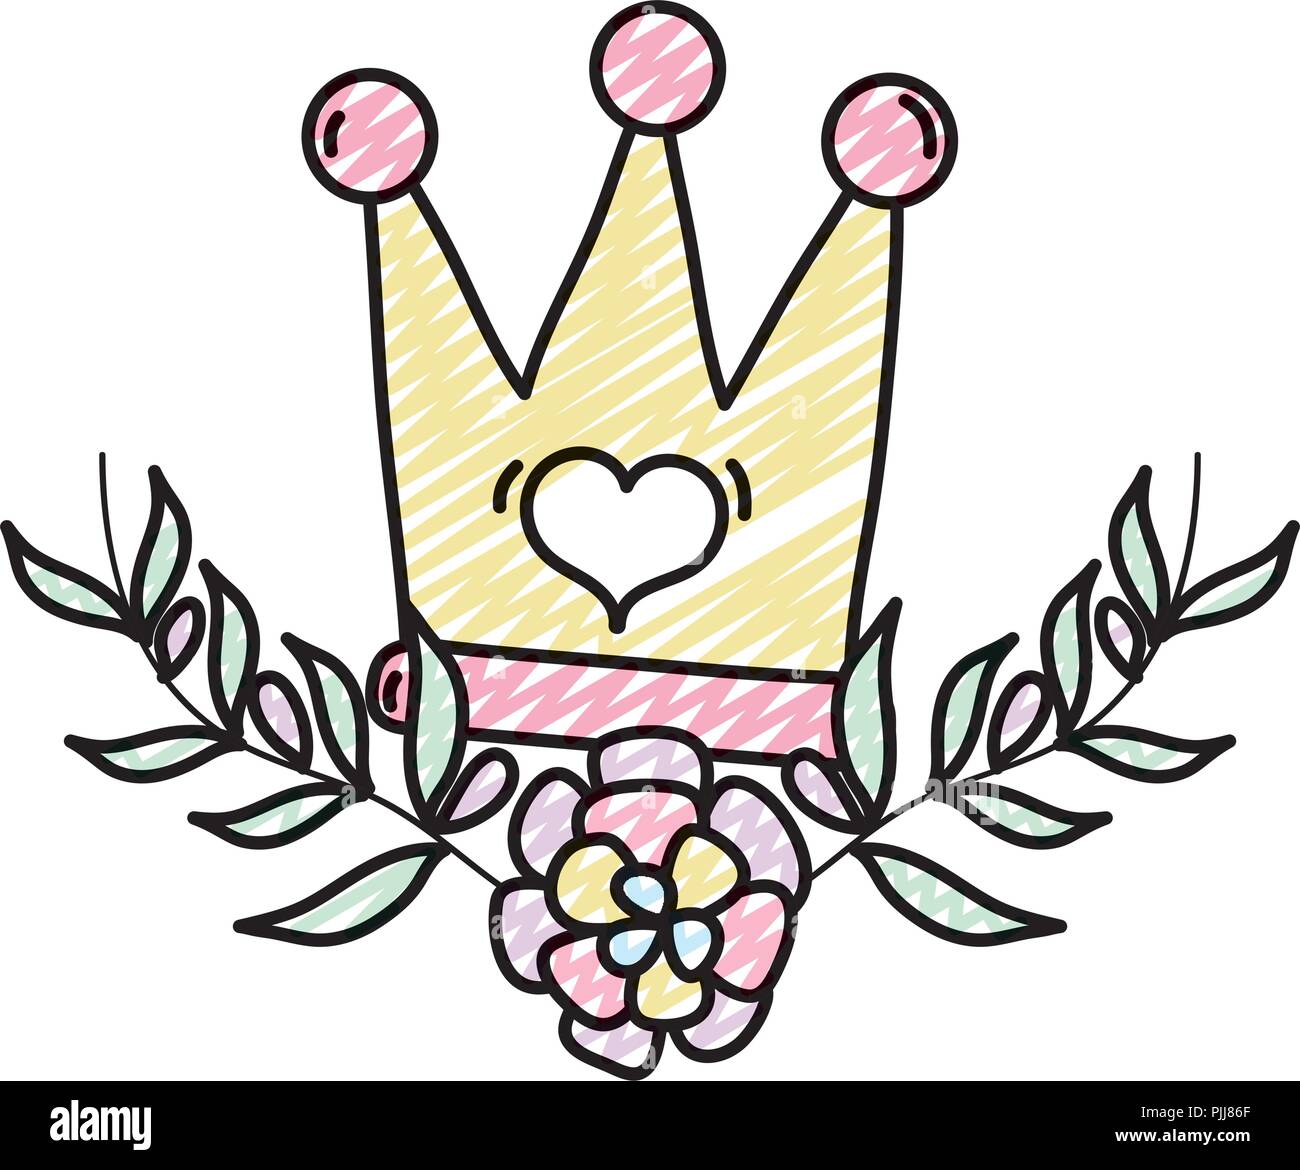 icon crown royal with branches leaves and flower Stock Vector Image ...